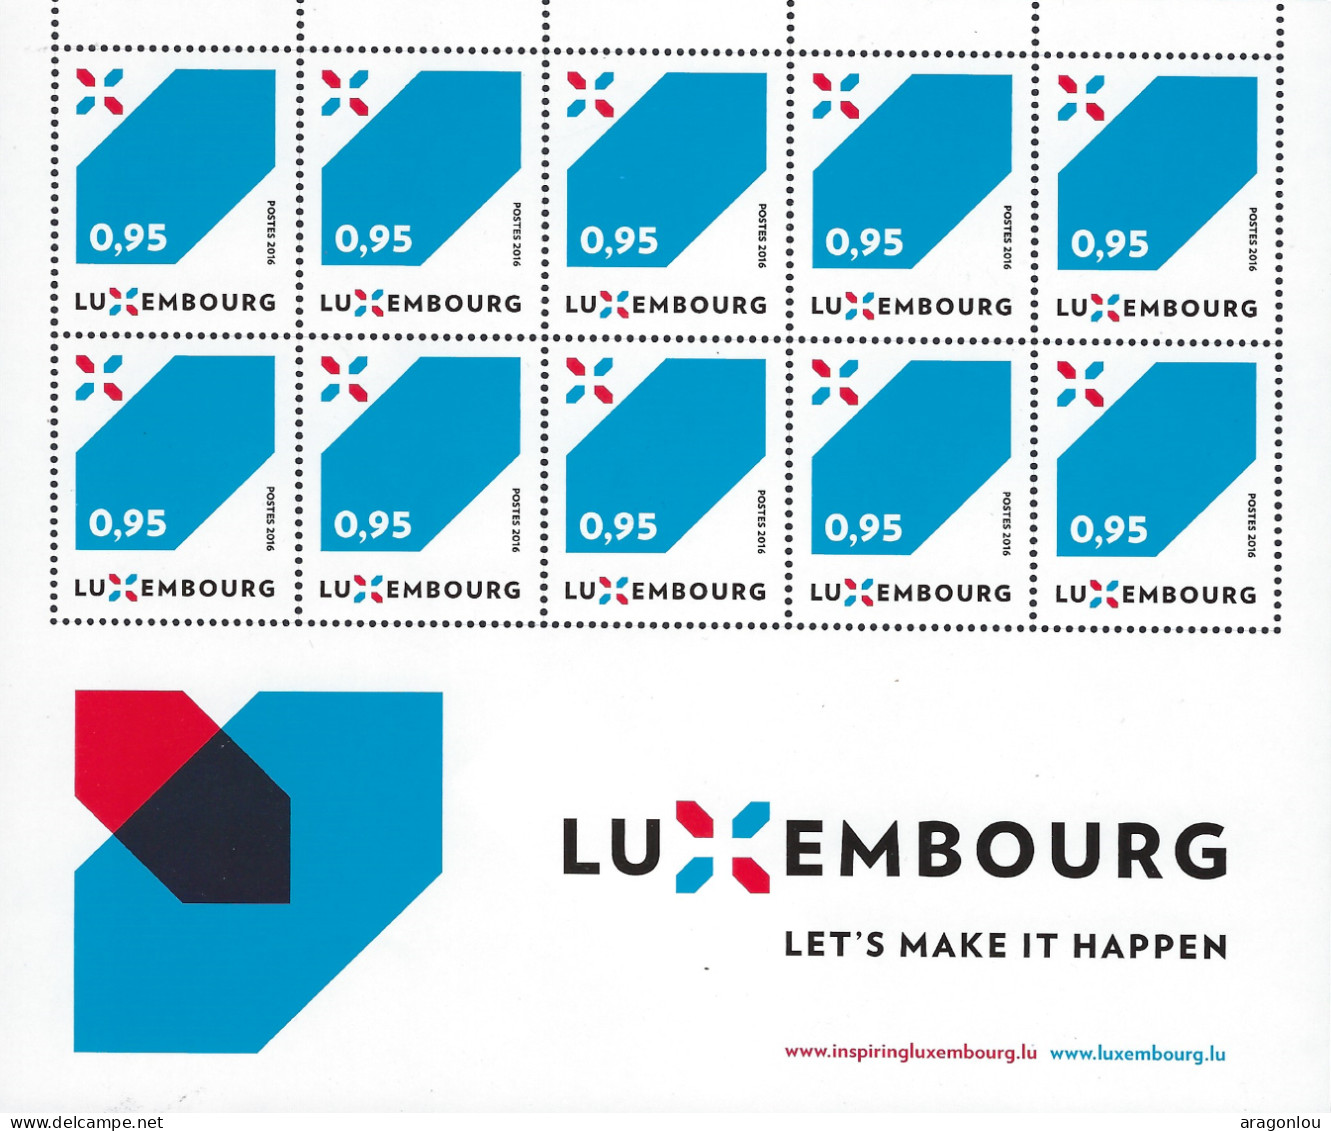 Luxembourg - Luxemburg - Timbres - Feuillet  à  10 Timbres X  1,05 -  2016  LUXEMBOURG  LET'S MAKE IT HAPPEN  MNH** - Blocs & Feuillets